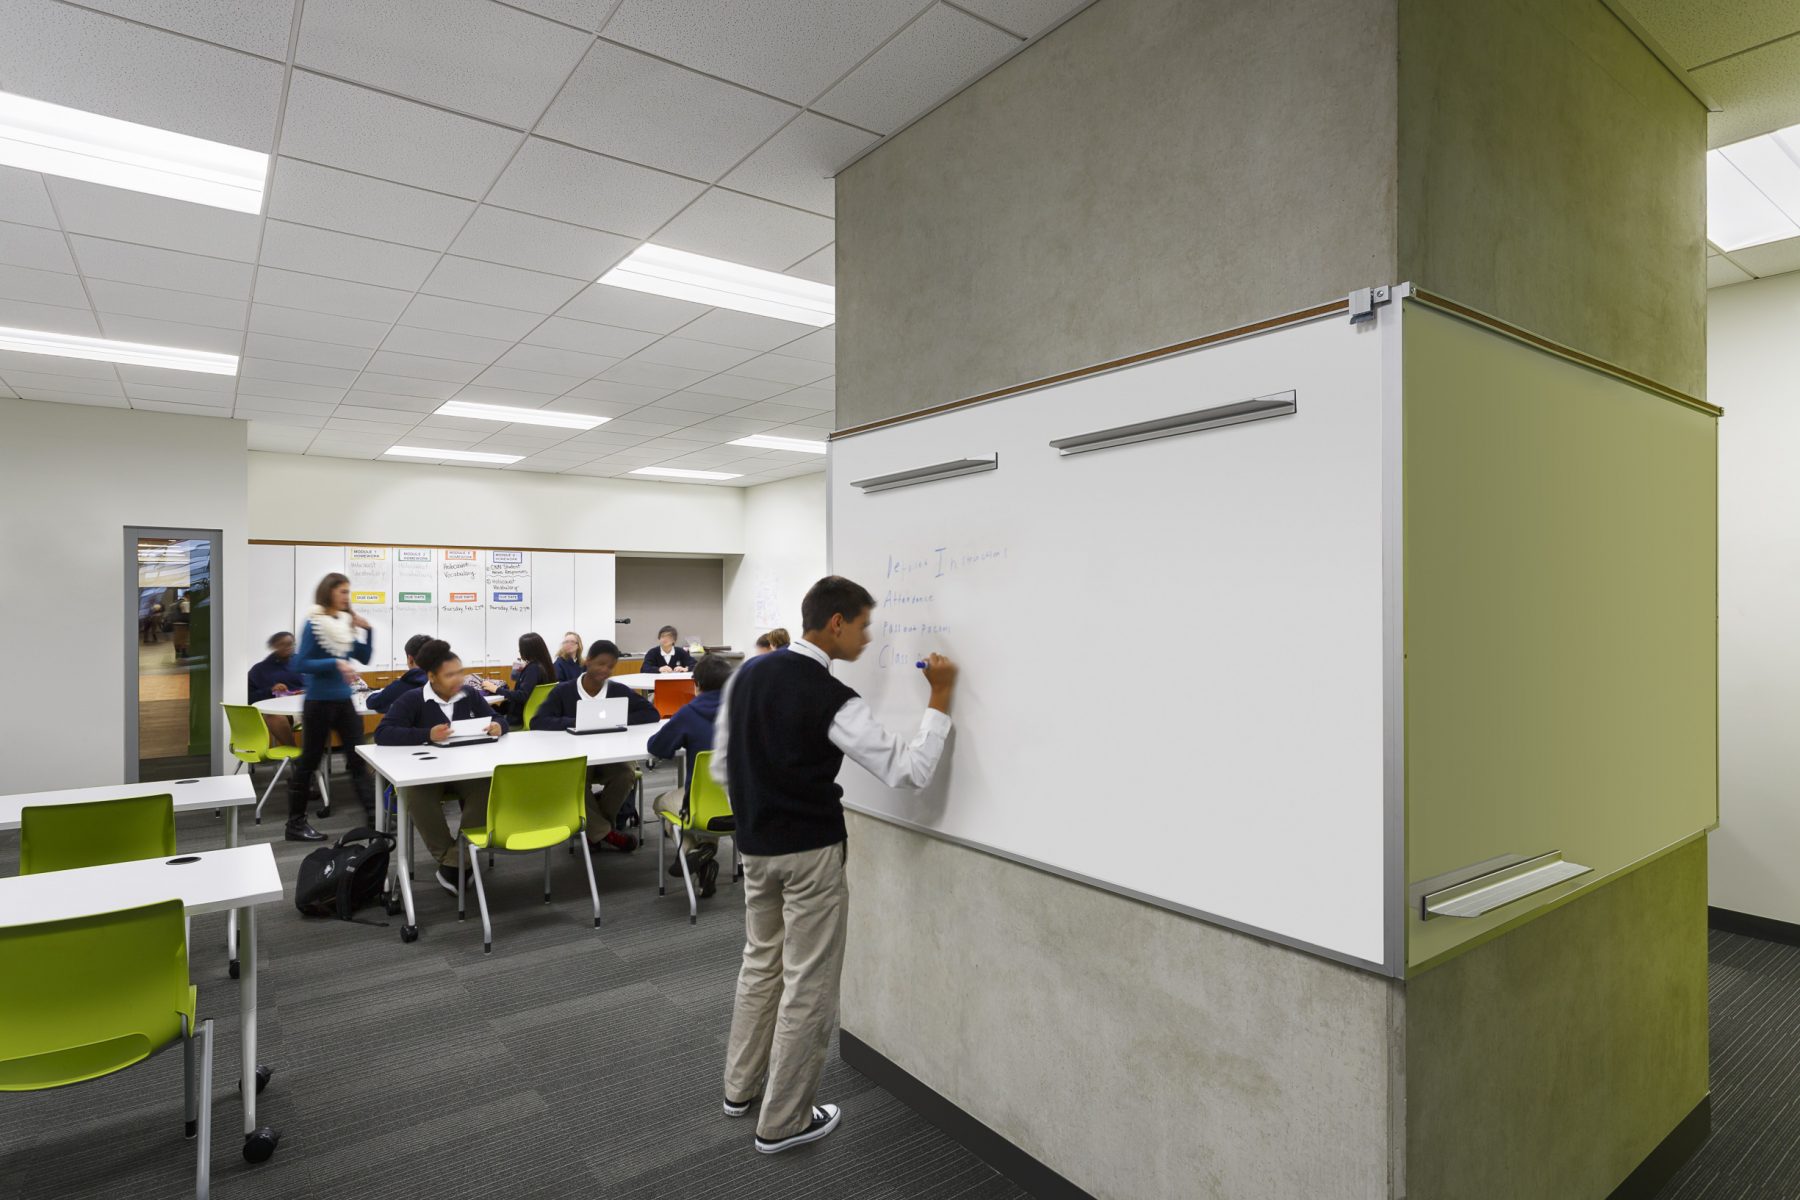 E3 Civic Hs Classroom, a student writes on the white board